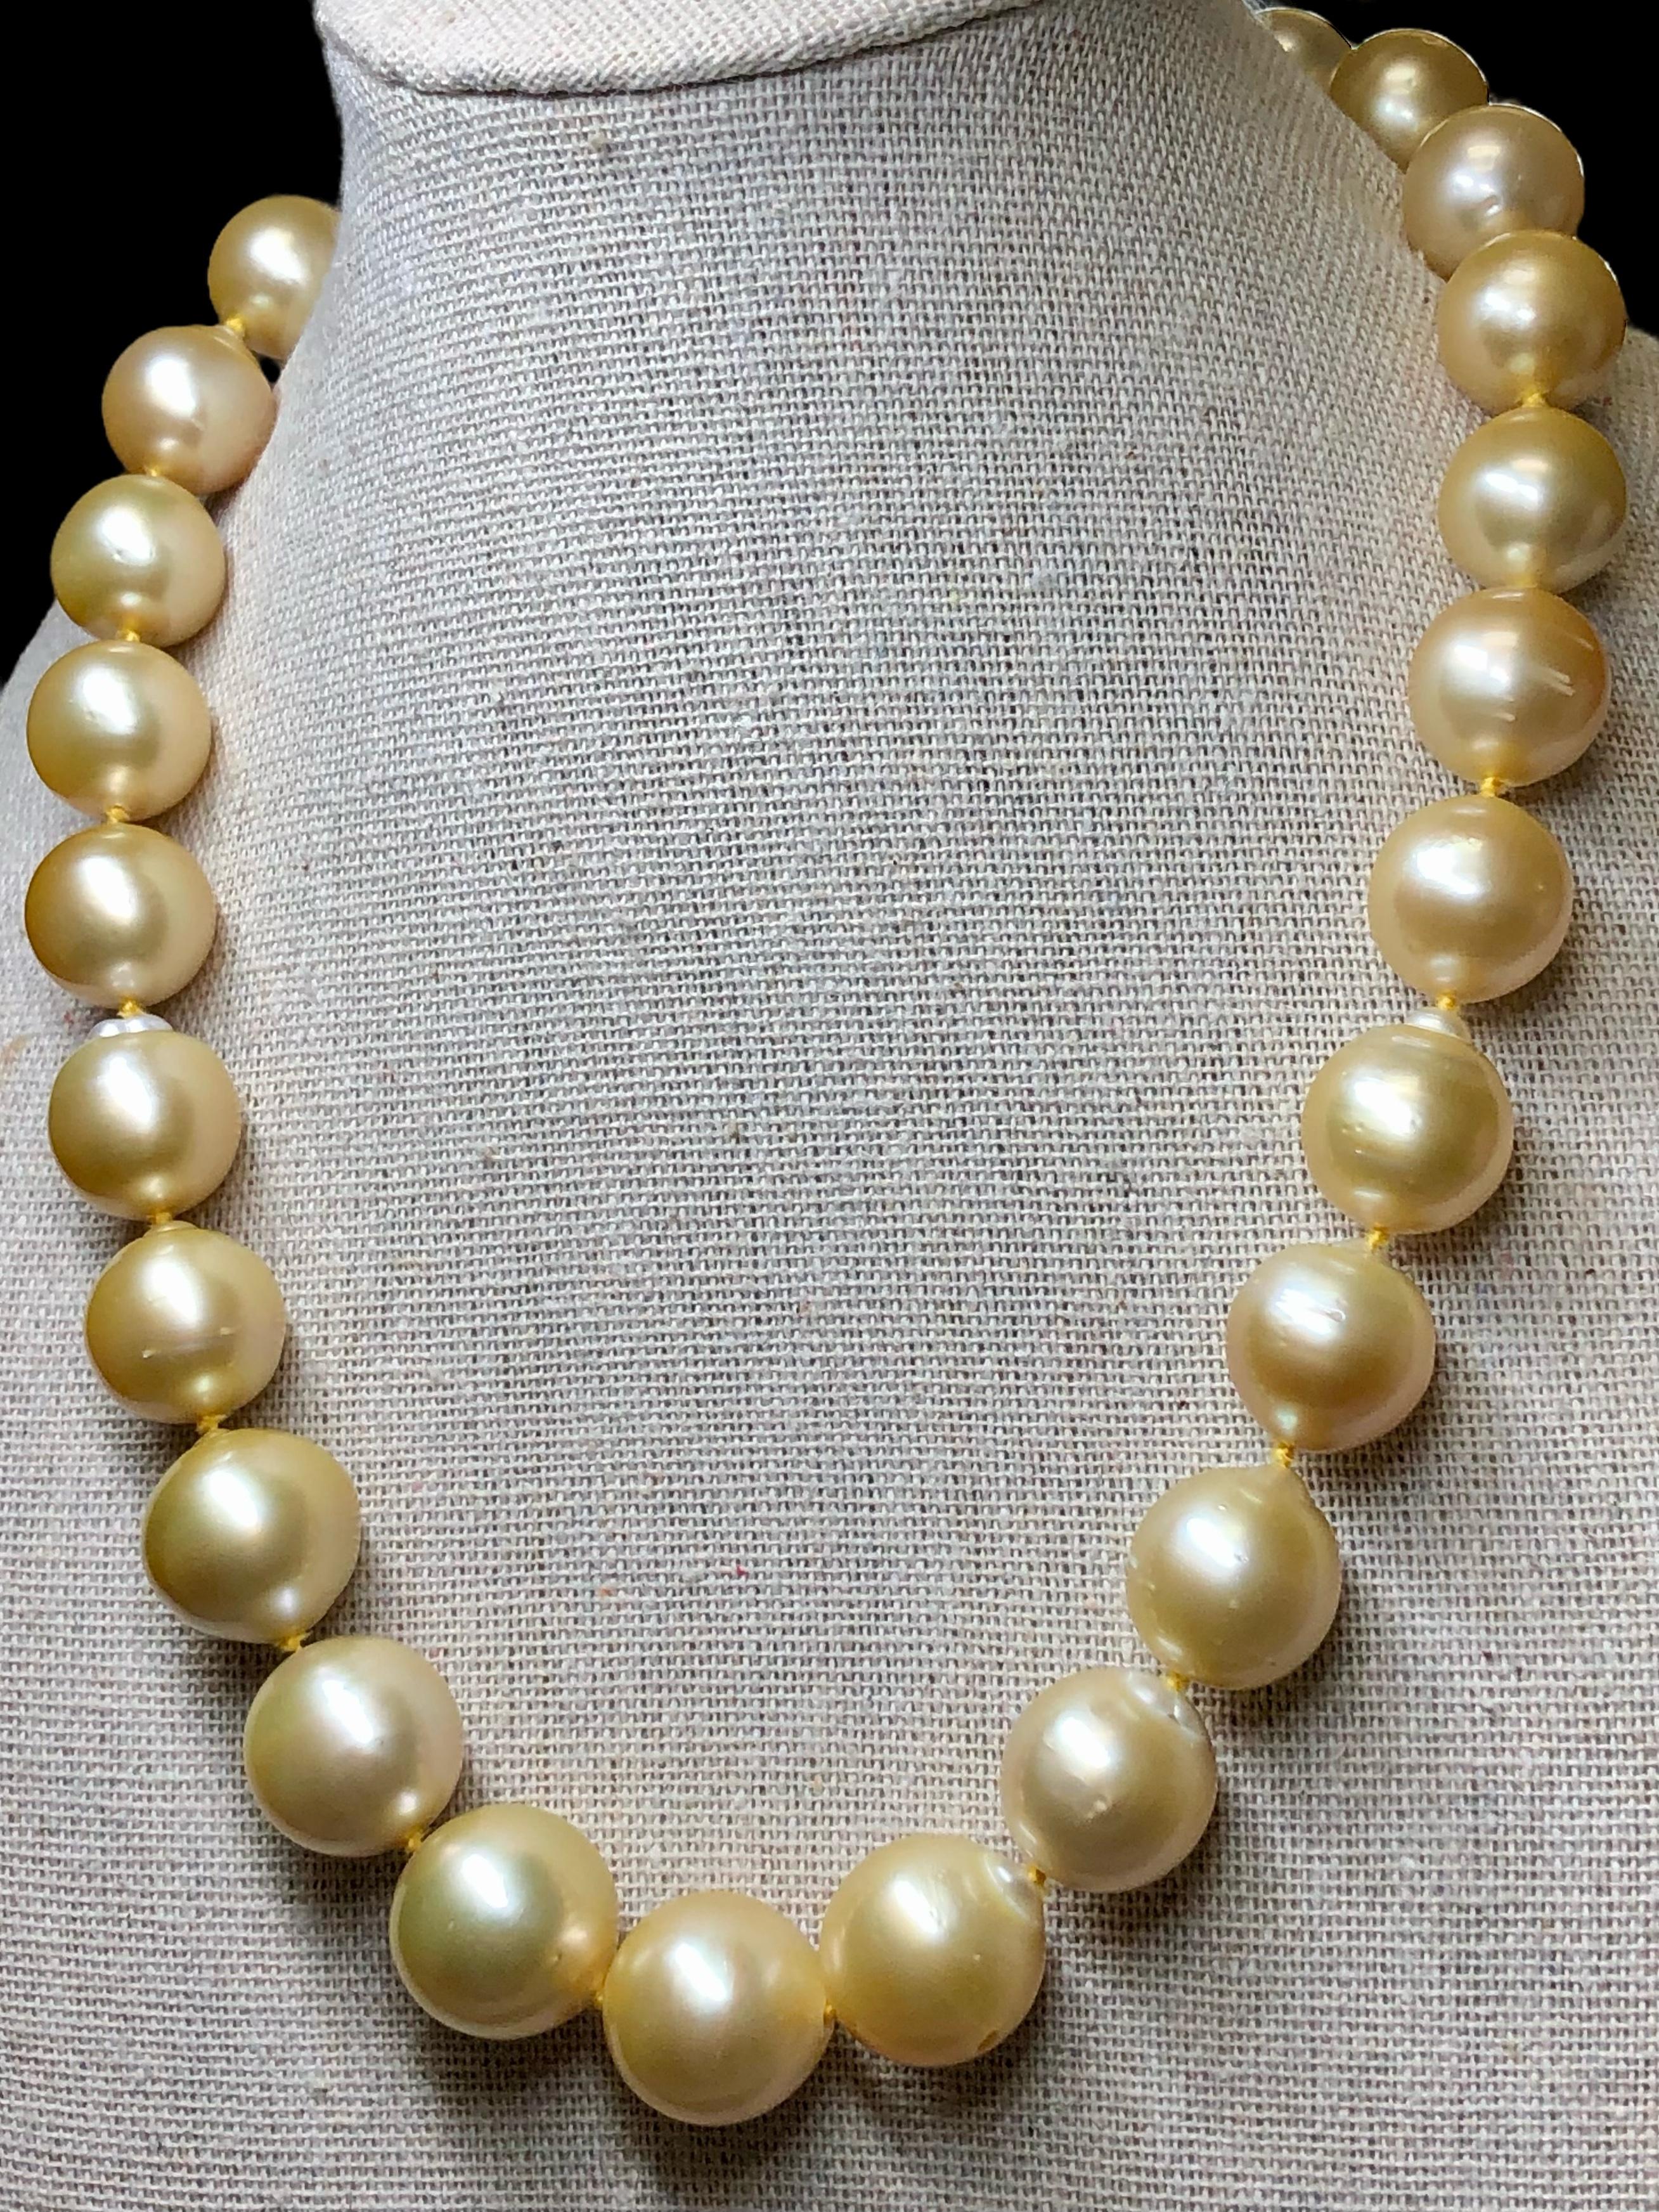 A lovely strand of very large graduated golden baroque South Sea pearls starting at 13.20mm and going all the way up to a whopping 16.10mm. Anyone that understands pearls understands just how big that it is! These pearls have a very even luster with